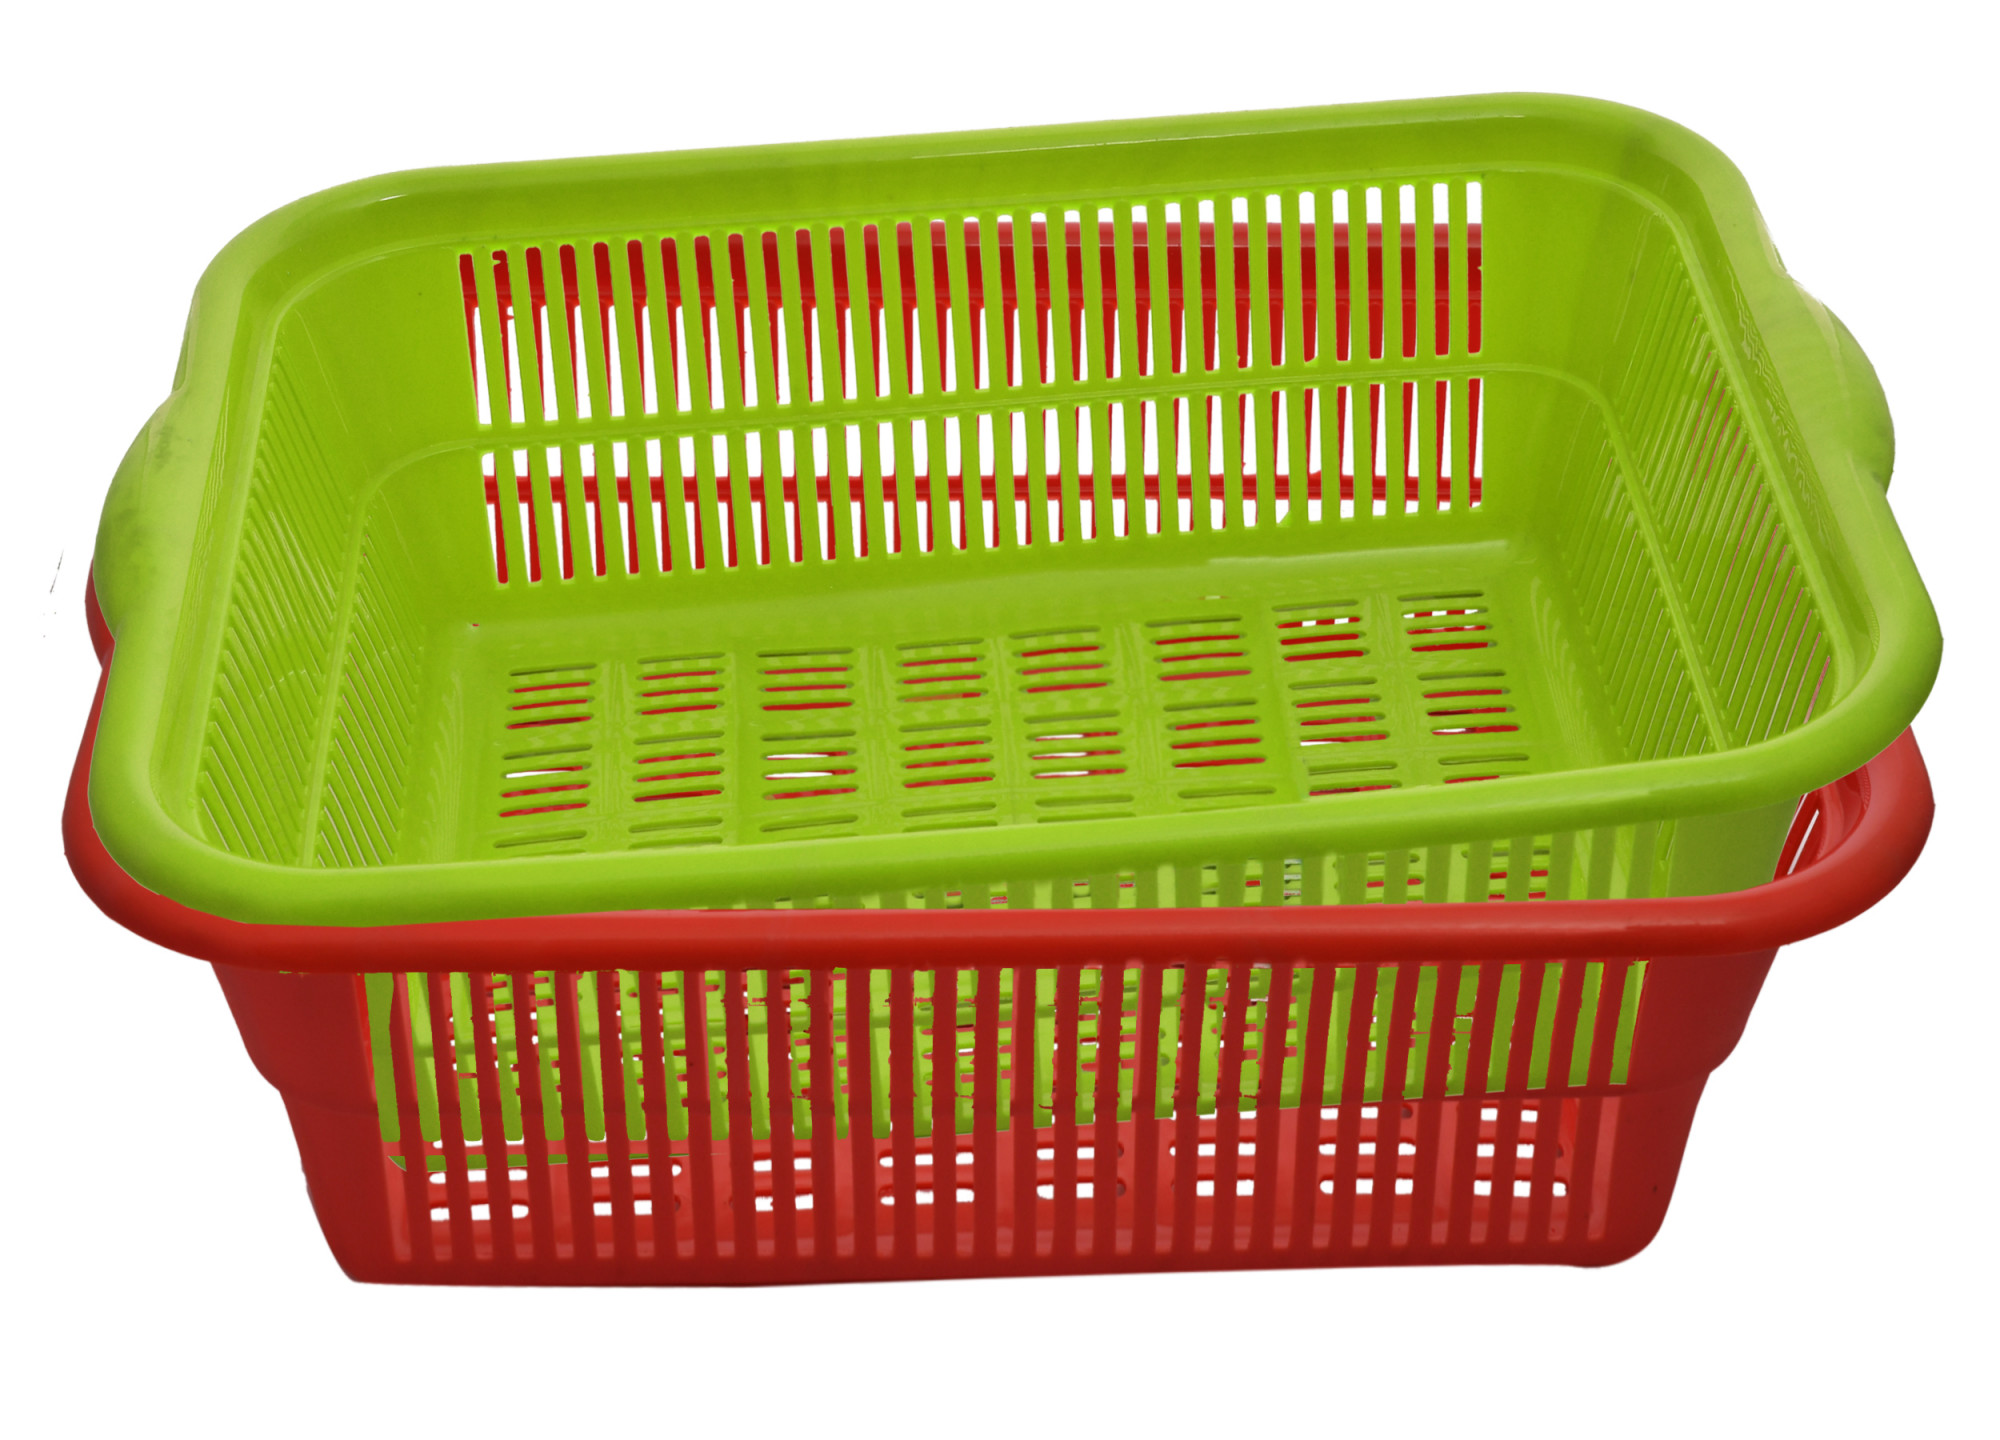 Kuber Industries Plastic Kitchen Dish Rack Drainer Vegetables And Fruits Basket Dish Rack Multipurpose Organizers ,Small Size,Green & Red